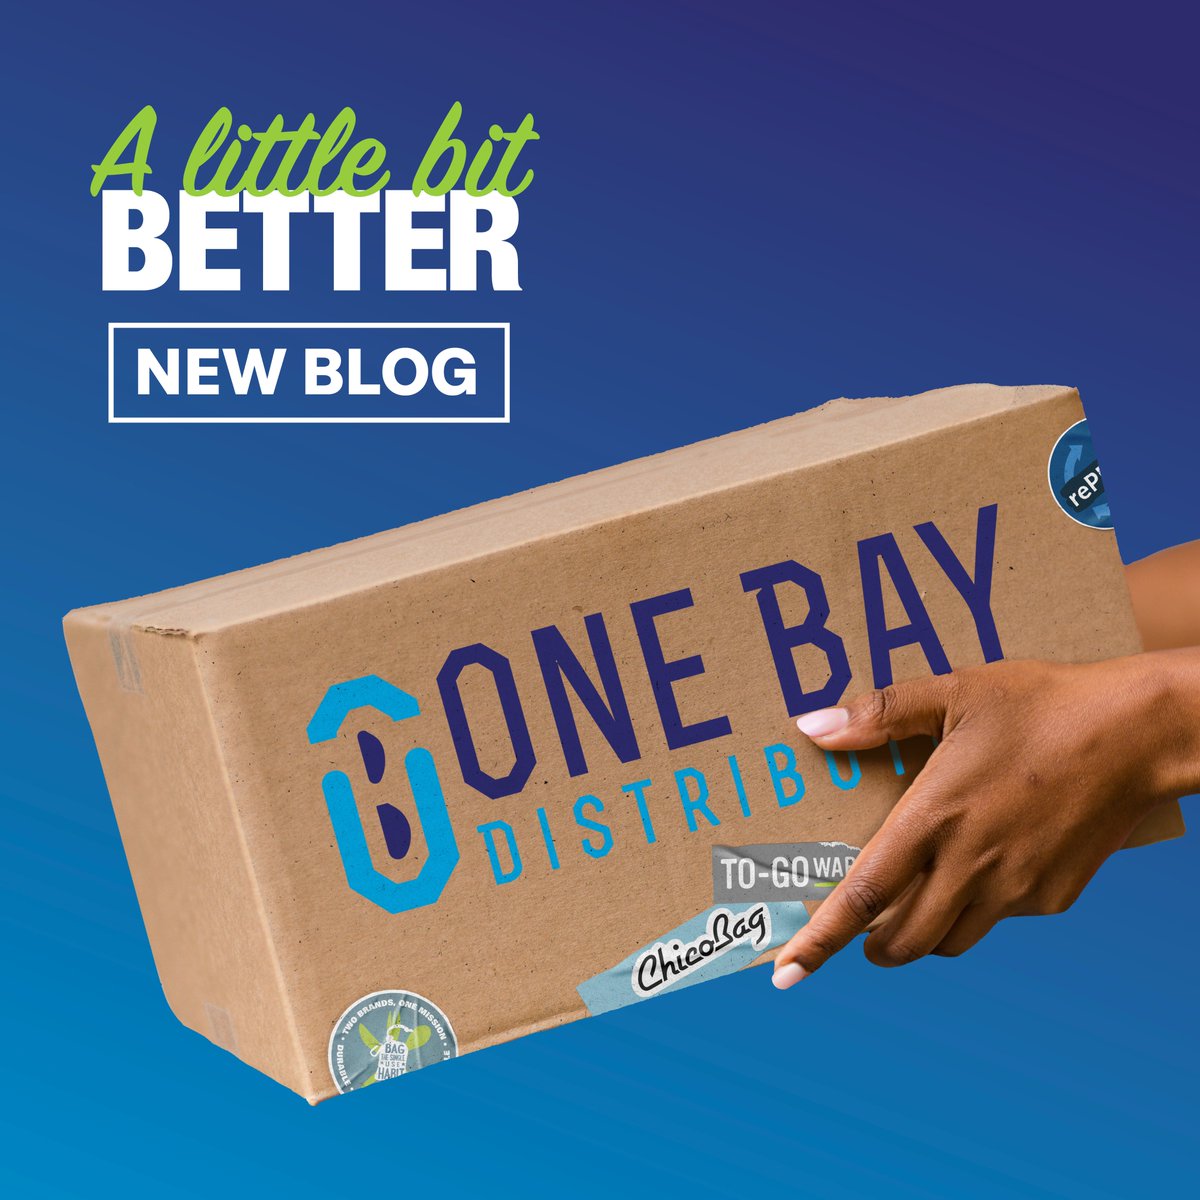 Are you an independent business looking for eco-friendly products? We've partnered with Faire, a wholesale eco-friendly marketplace for small businesses. Learn more about Faire and its parent company, One Bay, on this month’s blog: tinyurl.com/yemb3cpw #littlebitbetter